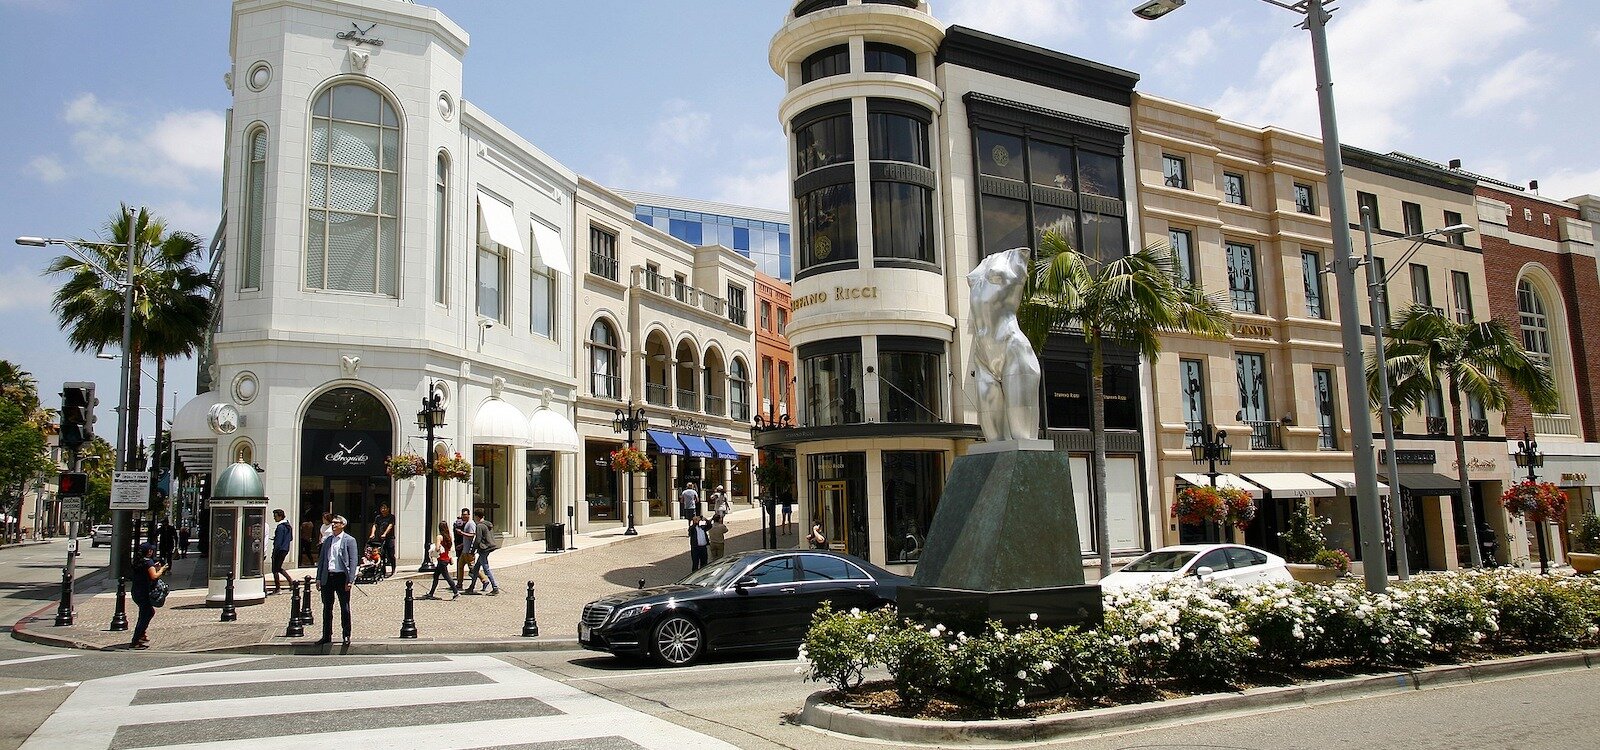 RODEO DRIVE - An epicenter of luxury, fashion and lifestyle